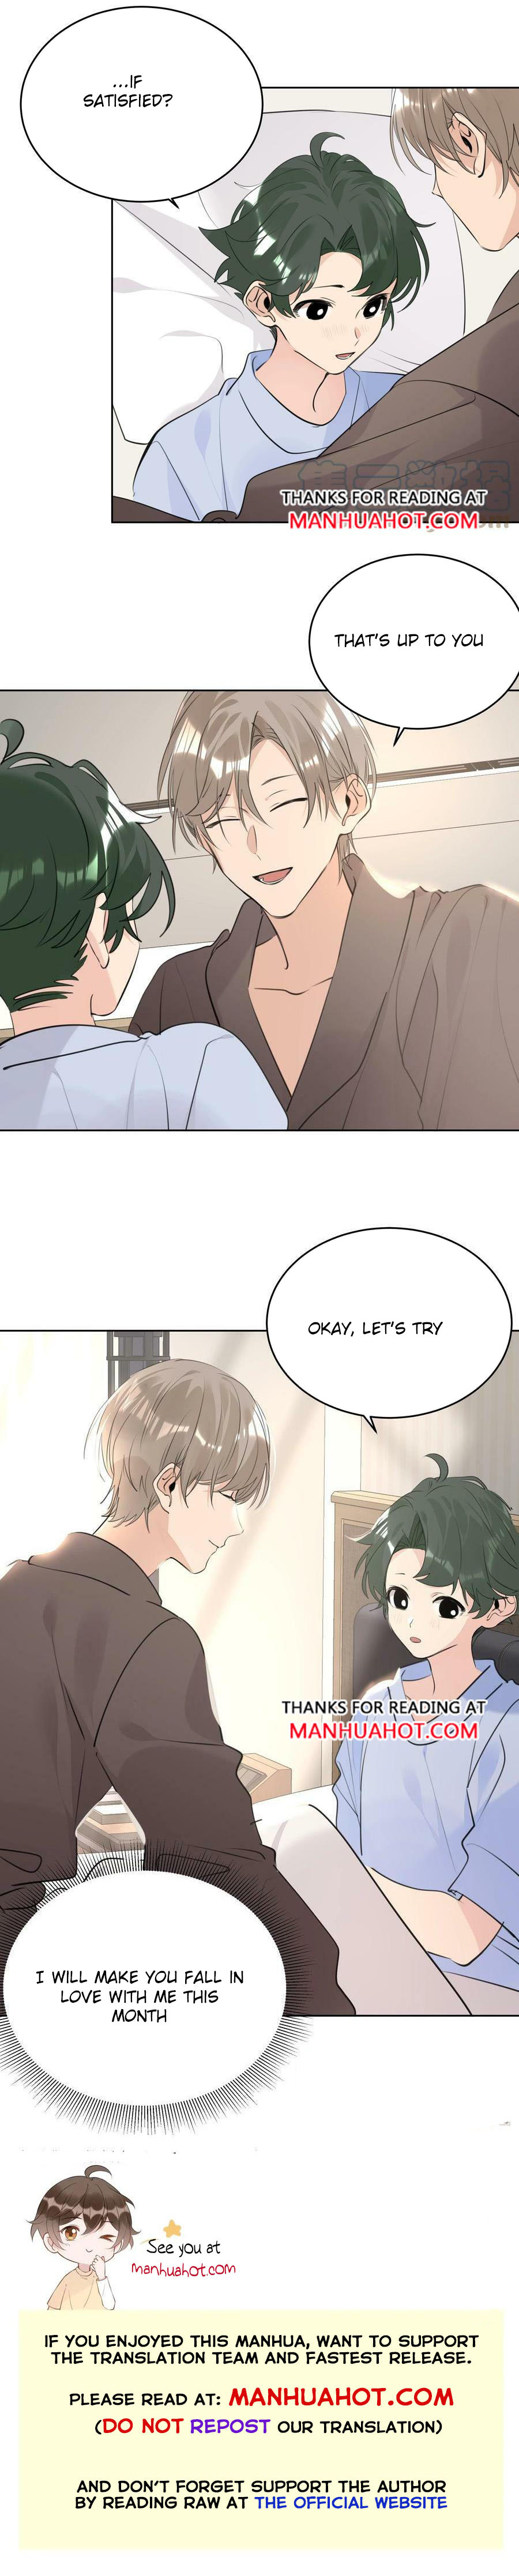 Did The Nerd Manage To Flirt With The Cutie Today? Chapter 64 #6